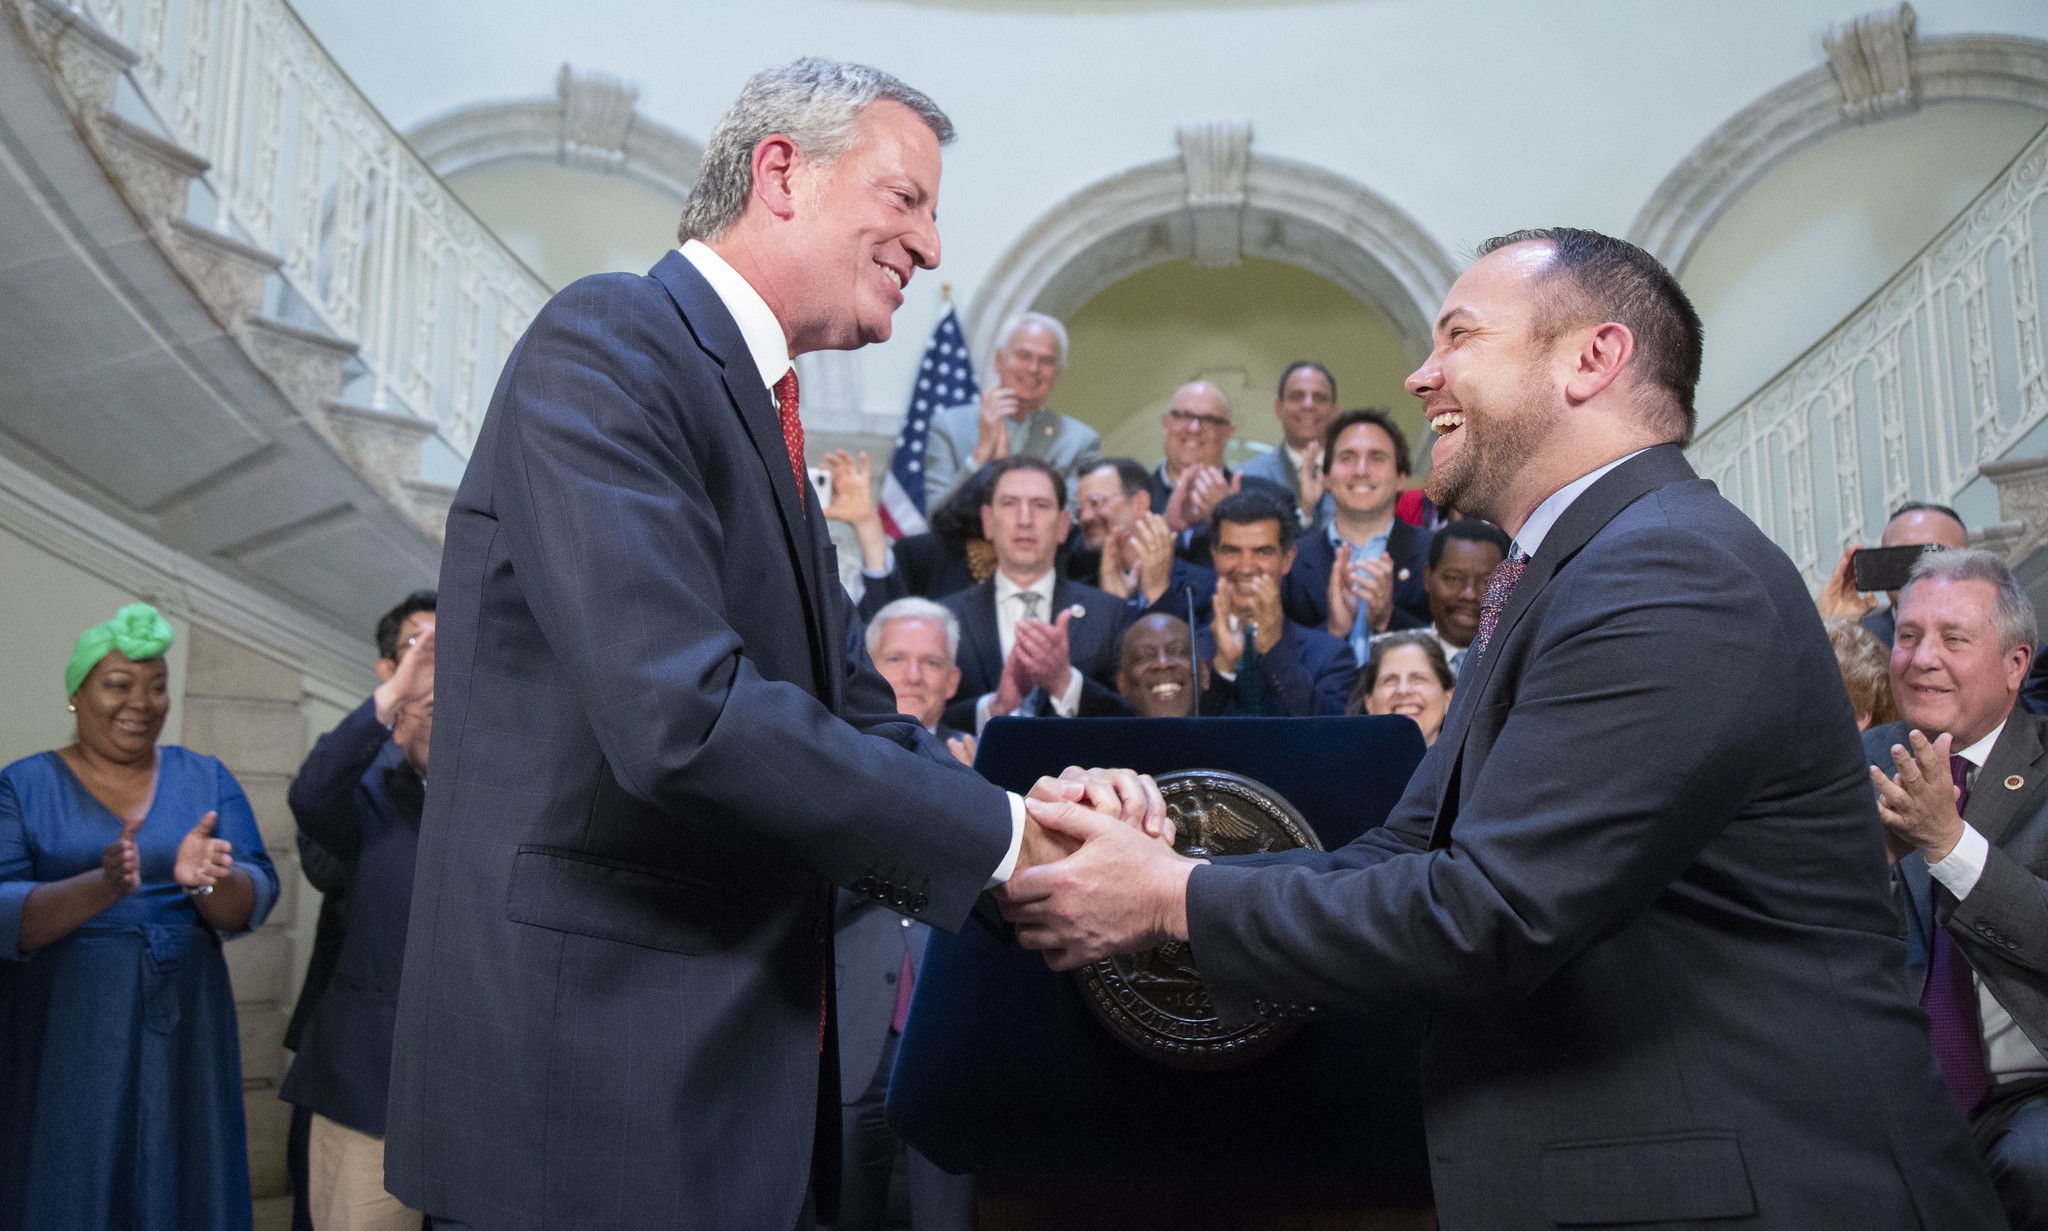 Speaker Corey Johnson and the NYC Council Join With Mayor de Blasio for Budget Handshake. Picture by John McCarten.